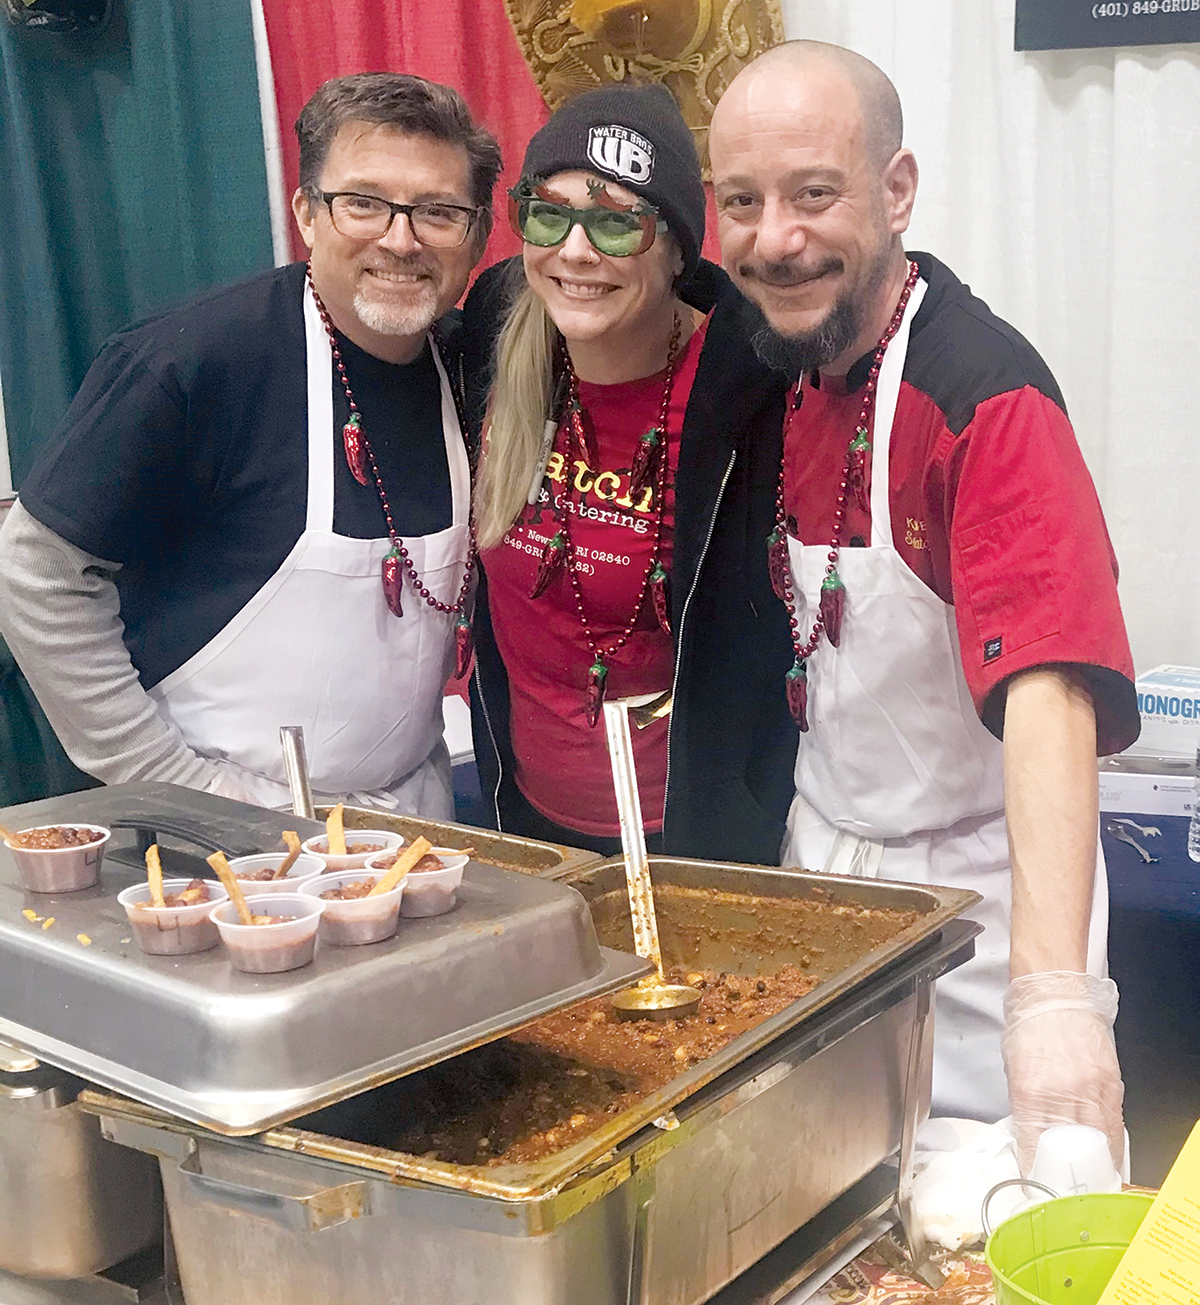 WINTER WARMER: The Chili Cook-Off is coming back to Newport after a two-year hiatus. From left, Jeff Rollings, Annie Sheehan and Kyle Bennett from Scratch Kitchen & Catering in Newport took part in the previous cook-off in 2020, just before the ­COVID-19 pandemic struck.  COURTESY NEWPORT WINTER FESTIVAL